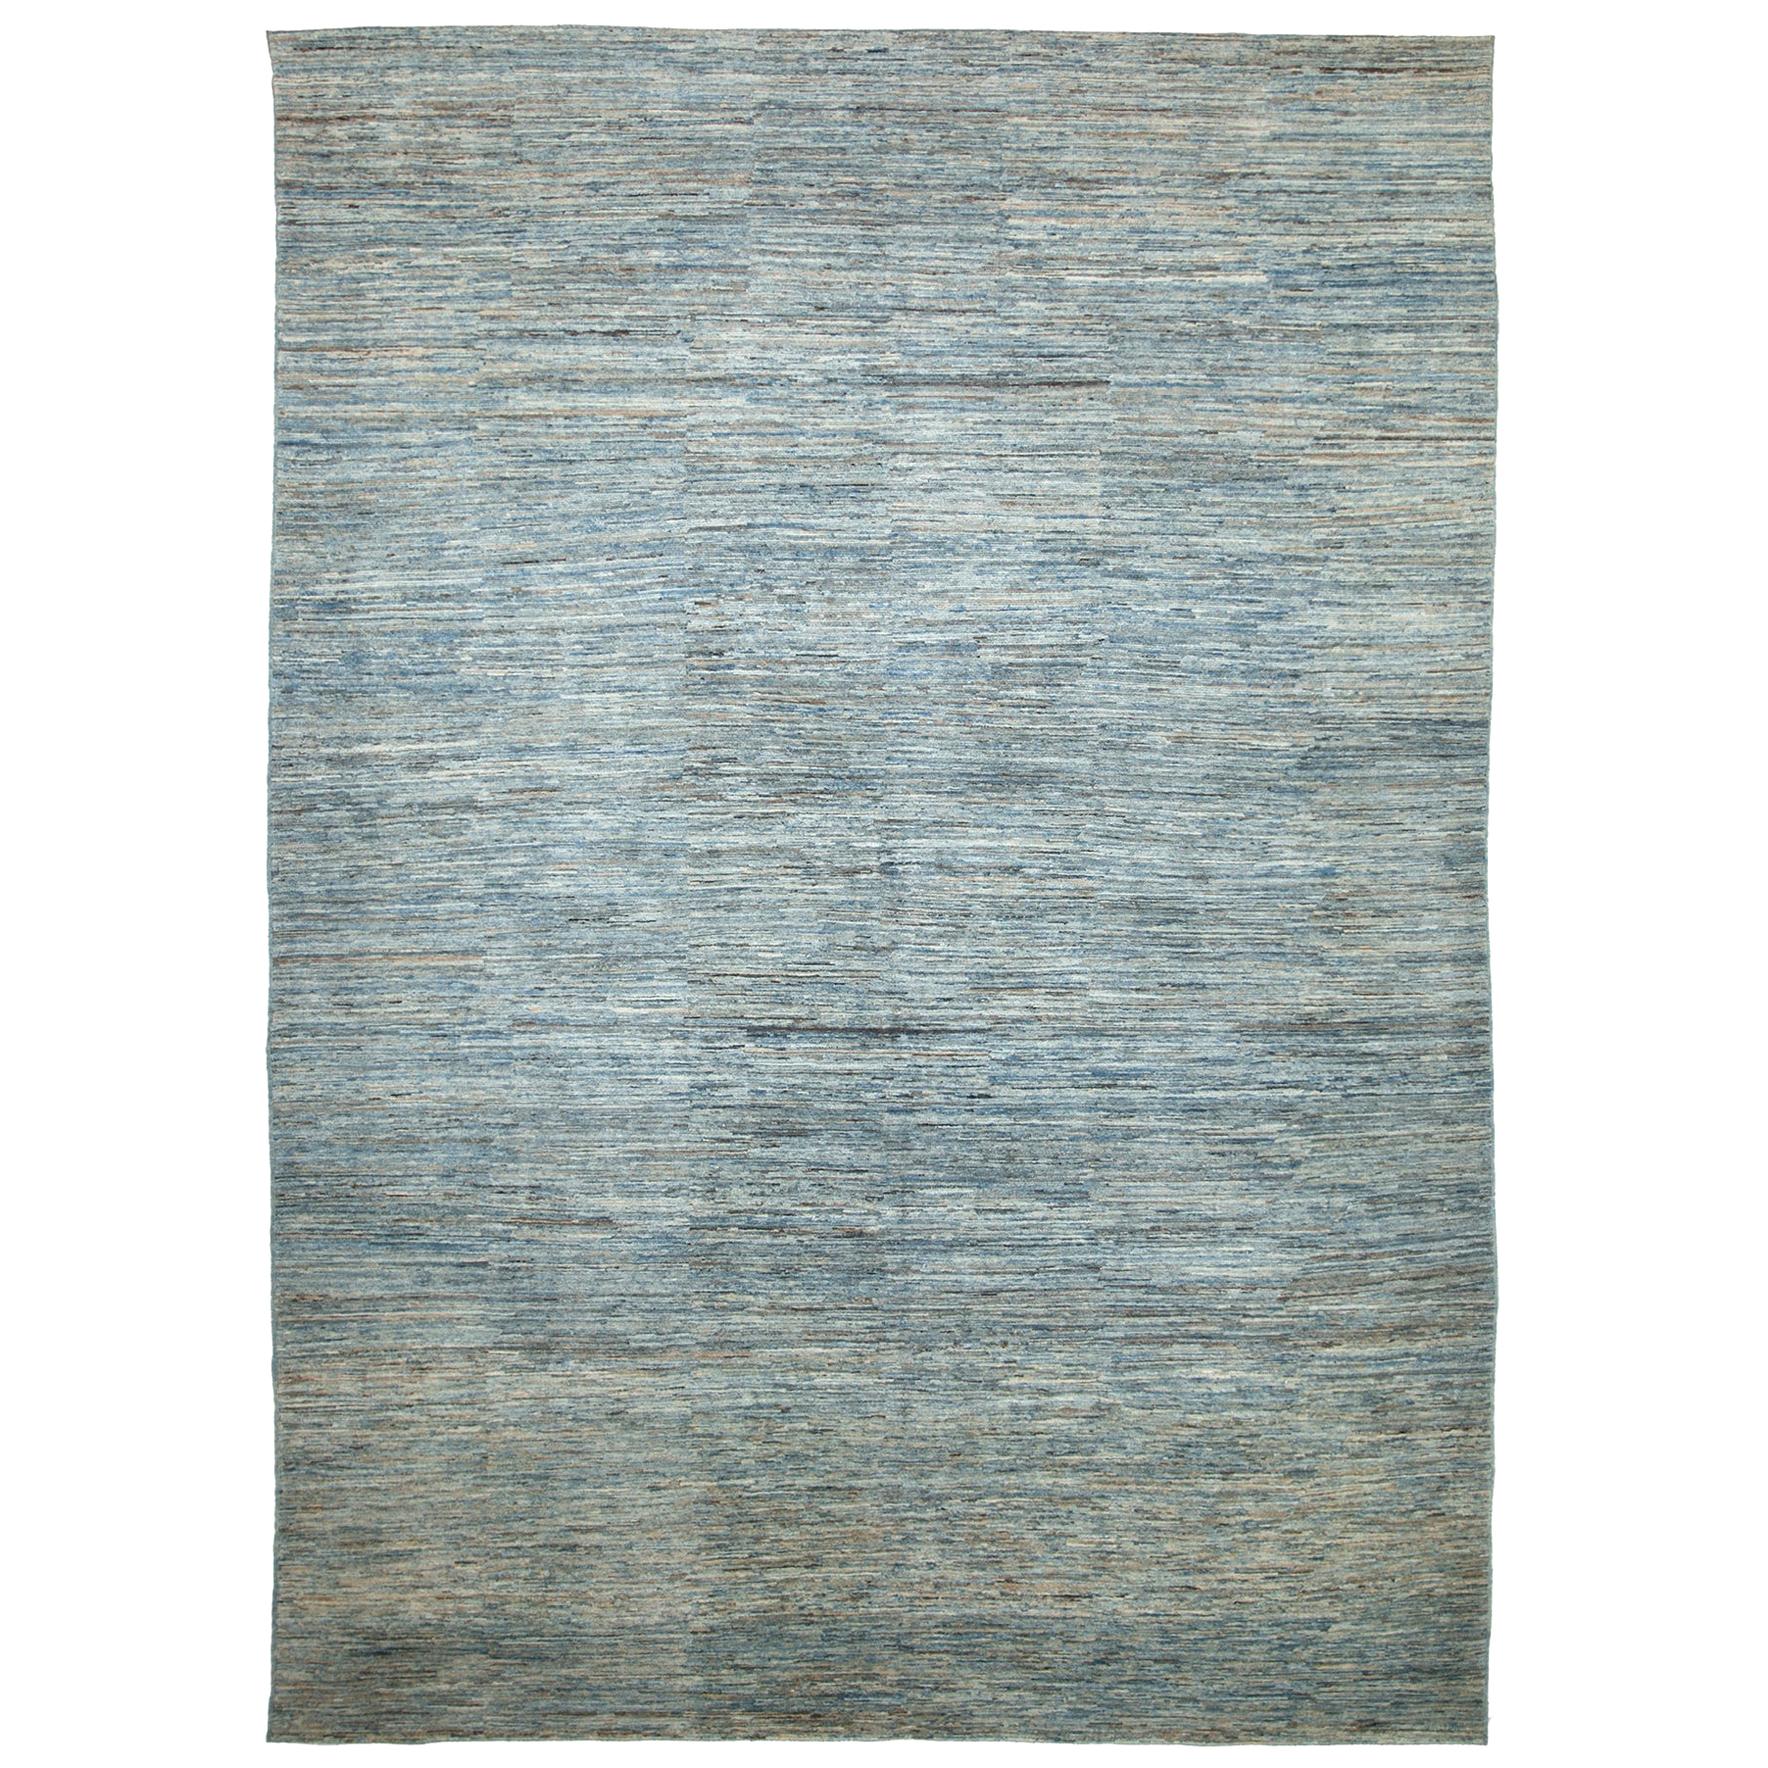 Green Blue Modern Moroccan Style Rug. Size: 9 ft 10 in x 13 ft 7 in